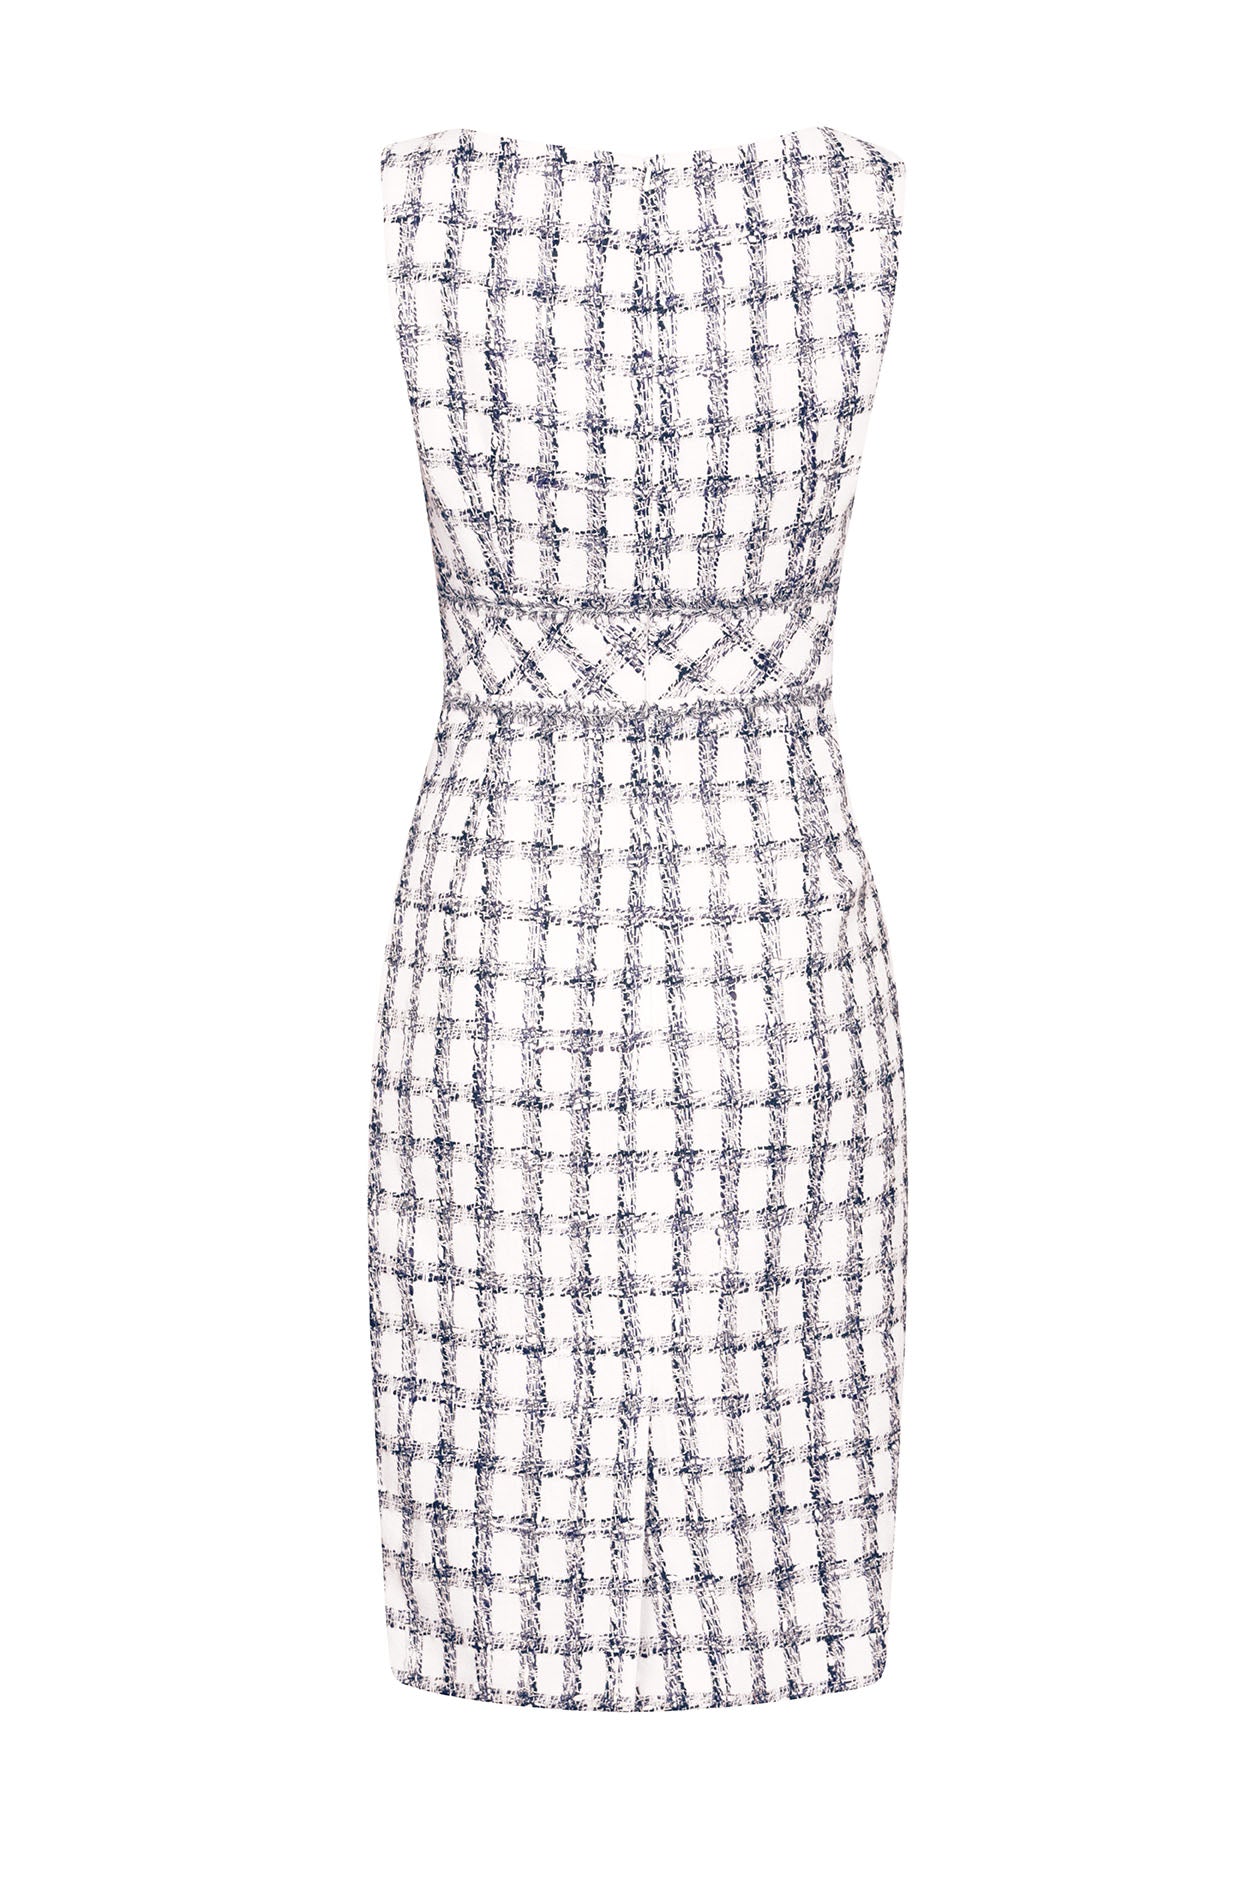 Sleeveless Shift Dress in Chic Navy/White Check Tweed and Fringe Trim - Aude